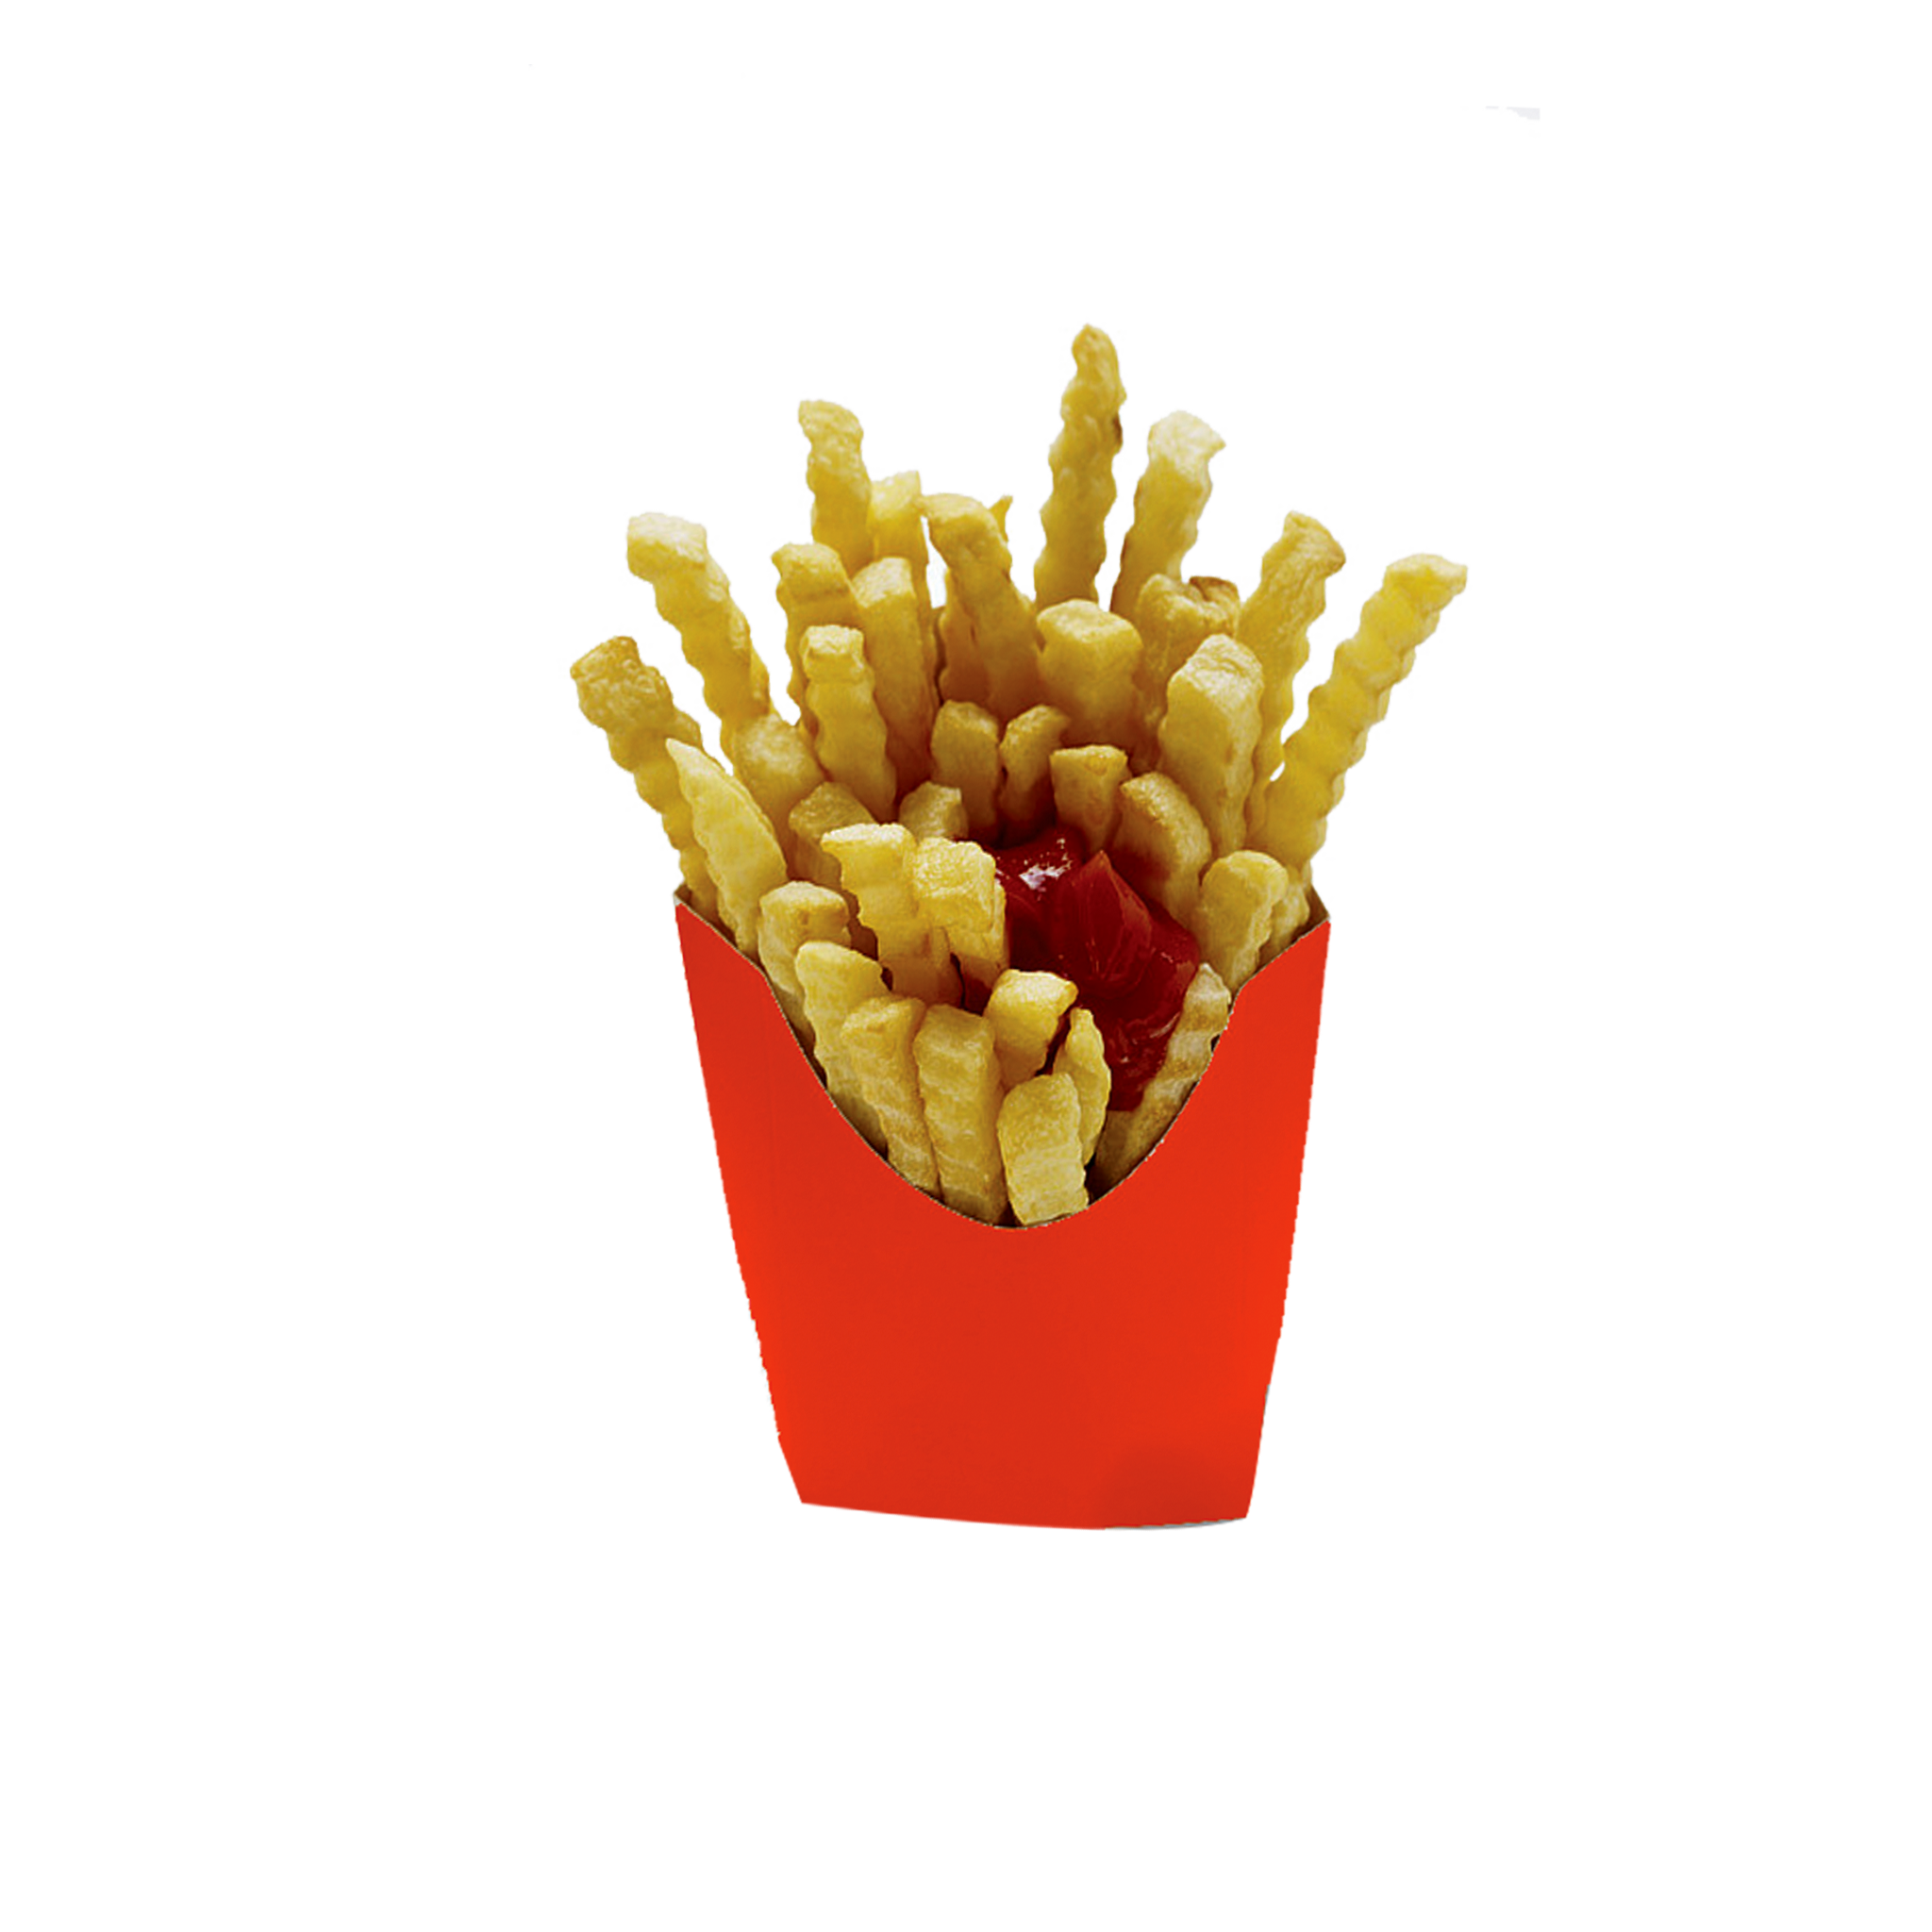 Fries French Potato Free Download Image PNG Image